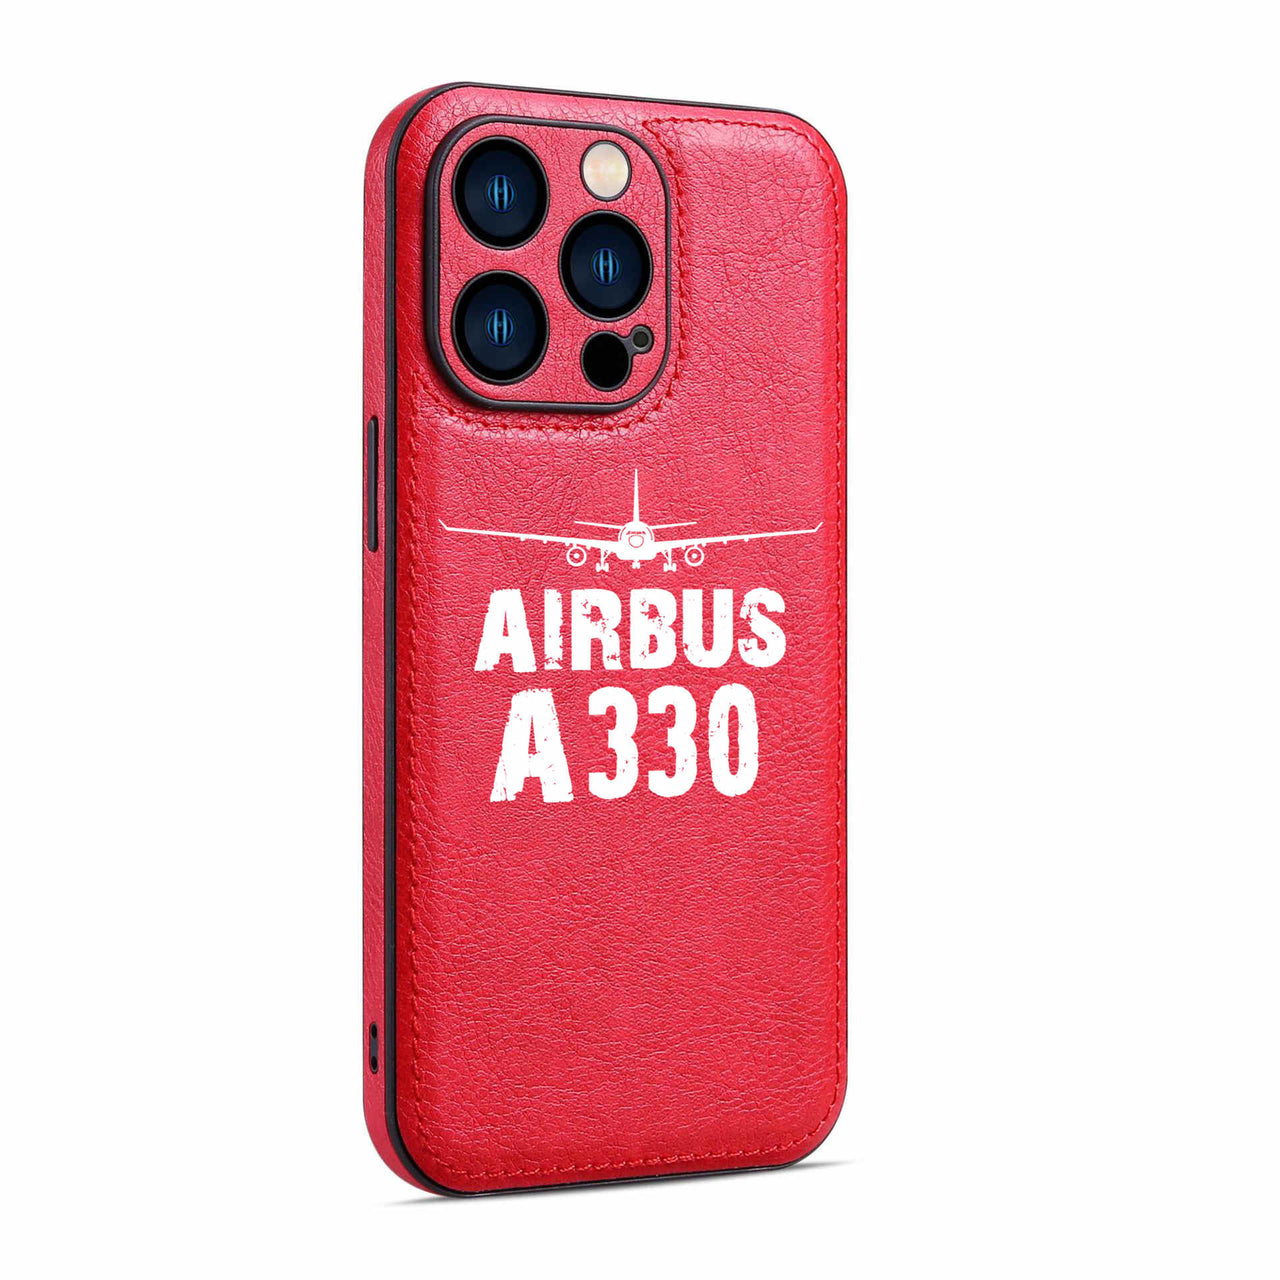 Airbus A330 & Plane Designed Leather iPhone Cases